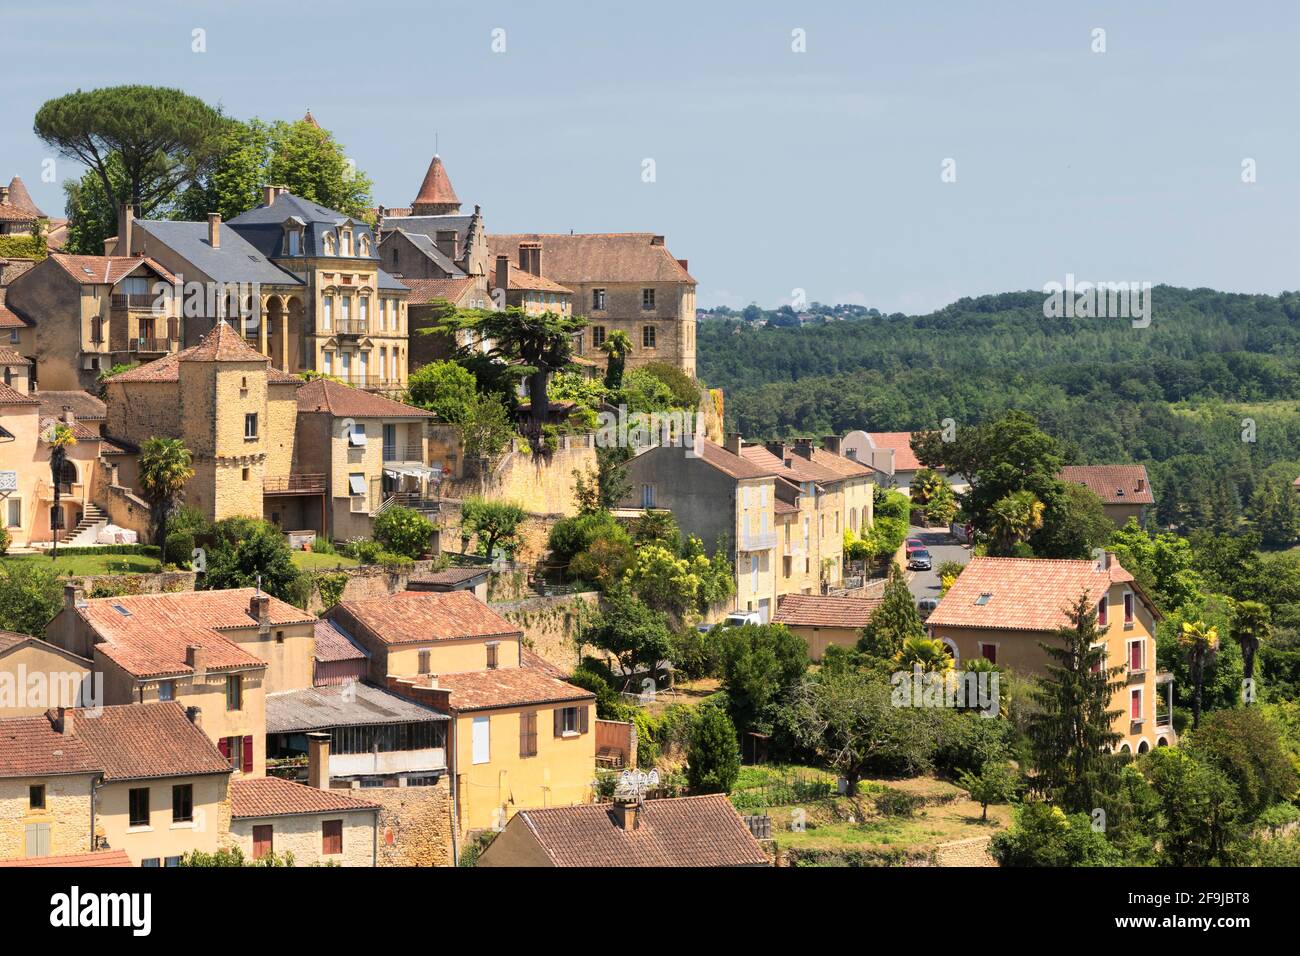 Belvès, in the Dordogne, is considered to be one of the most beautiful towns in France. The name quite literally means 'Beautiful view'. Stock Photo